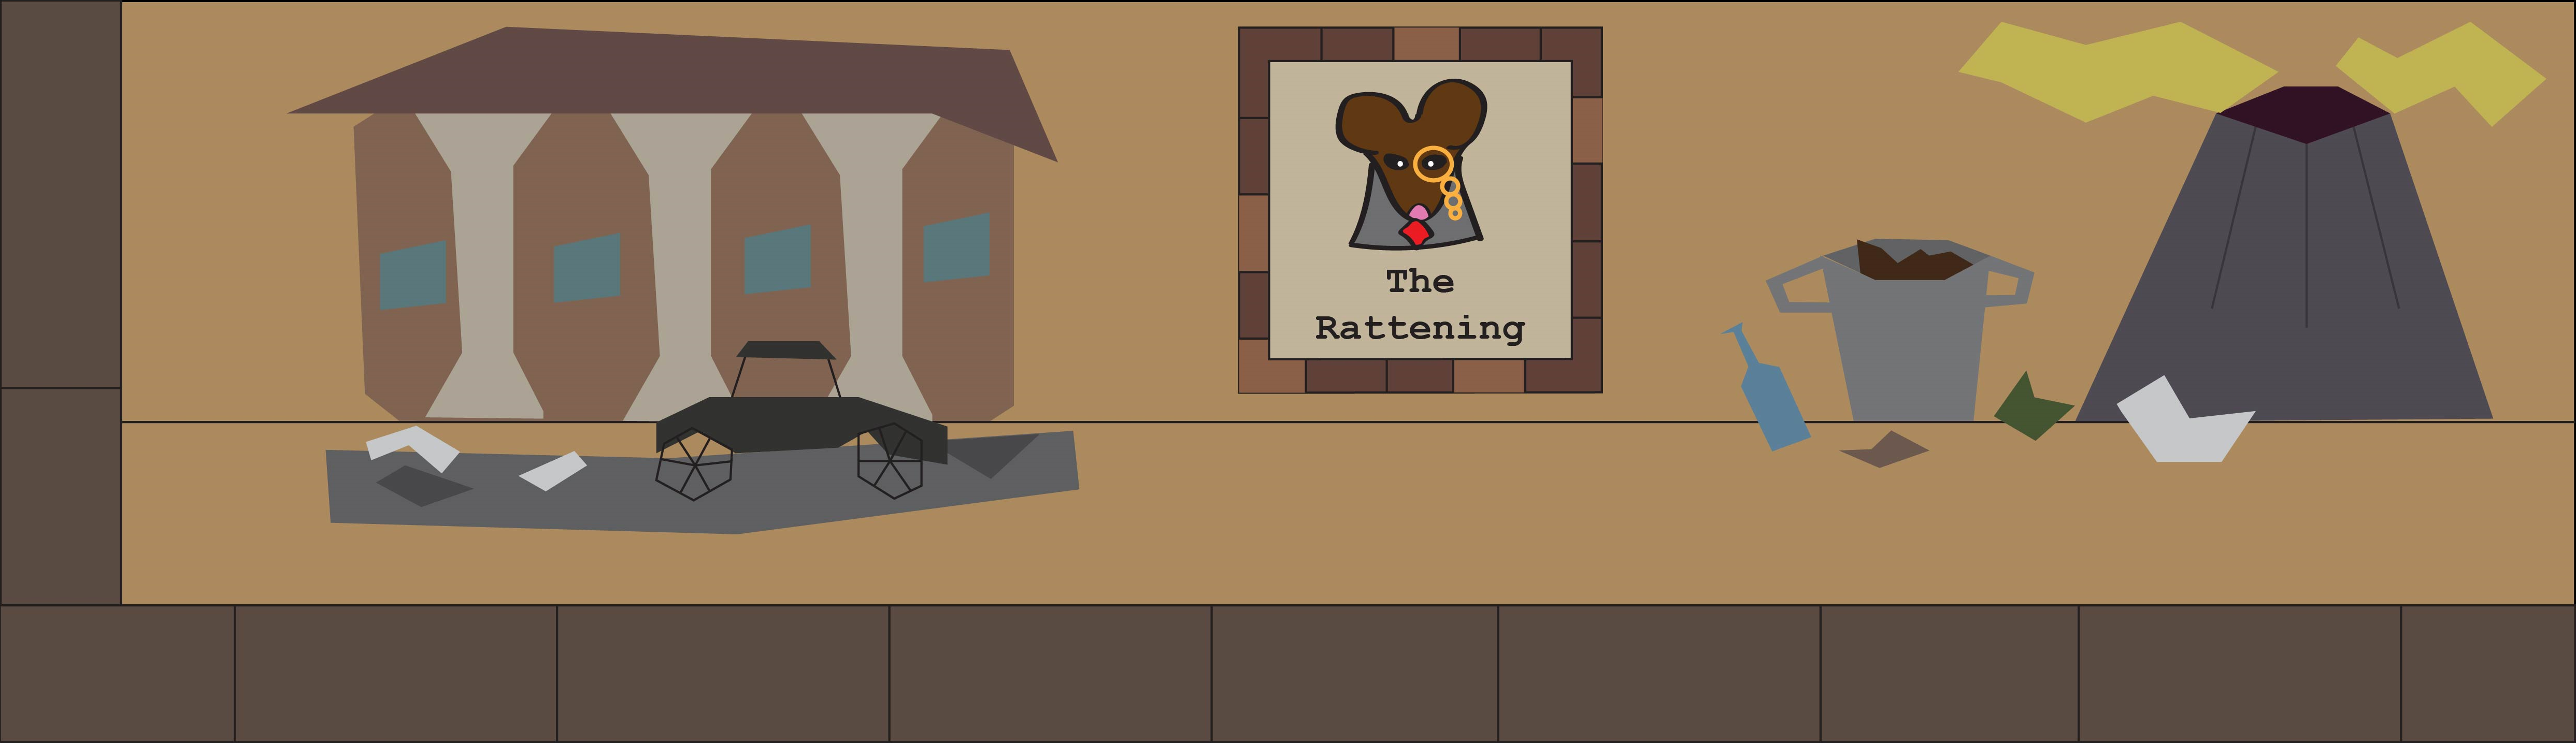 The Rattening